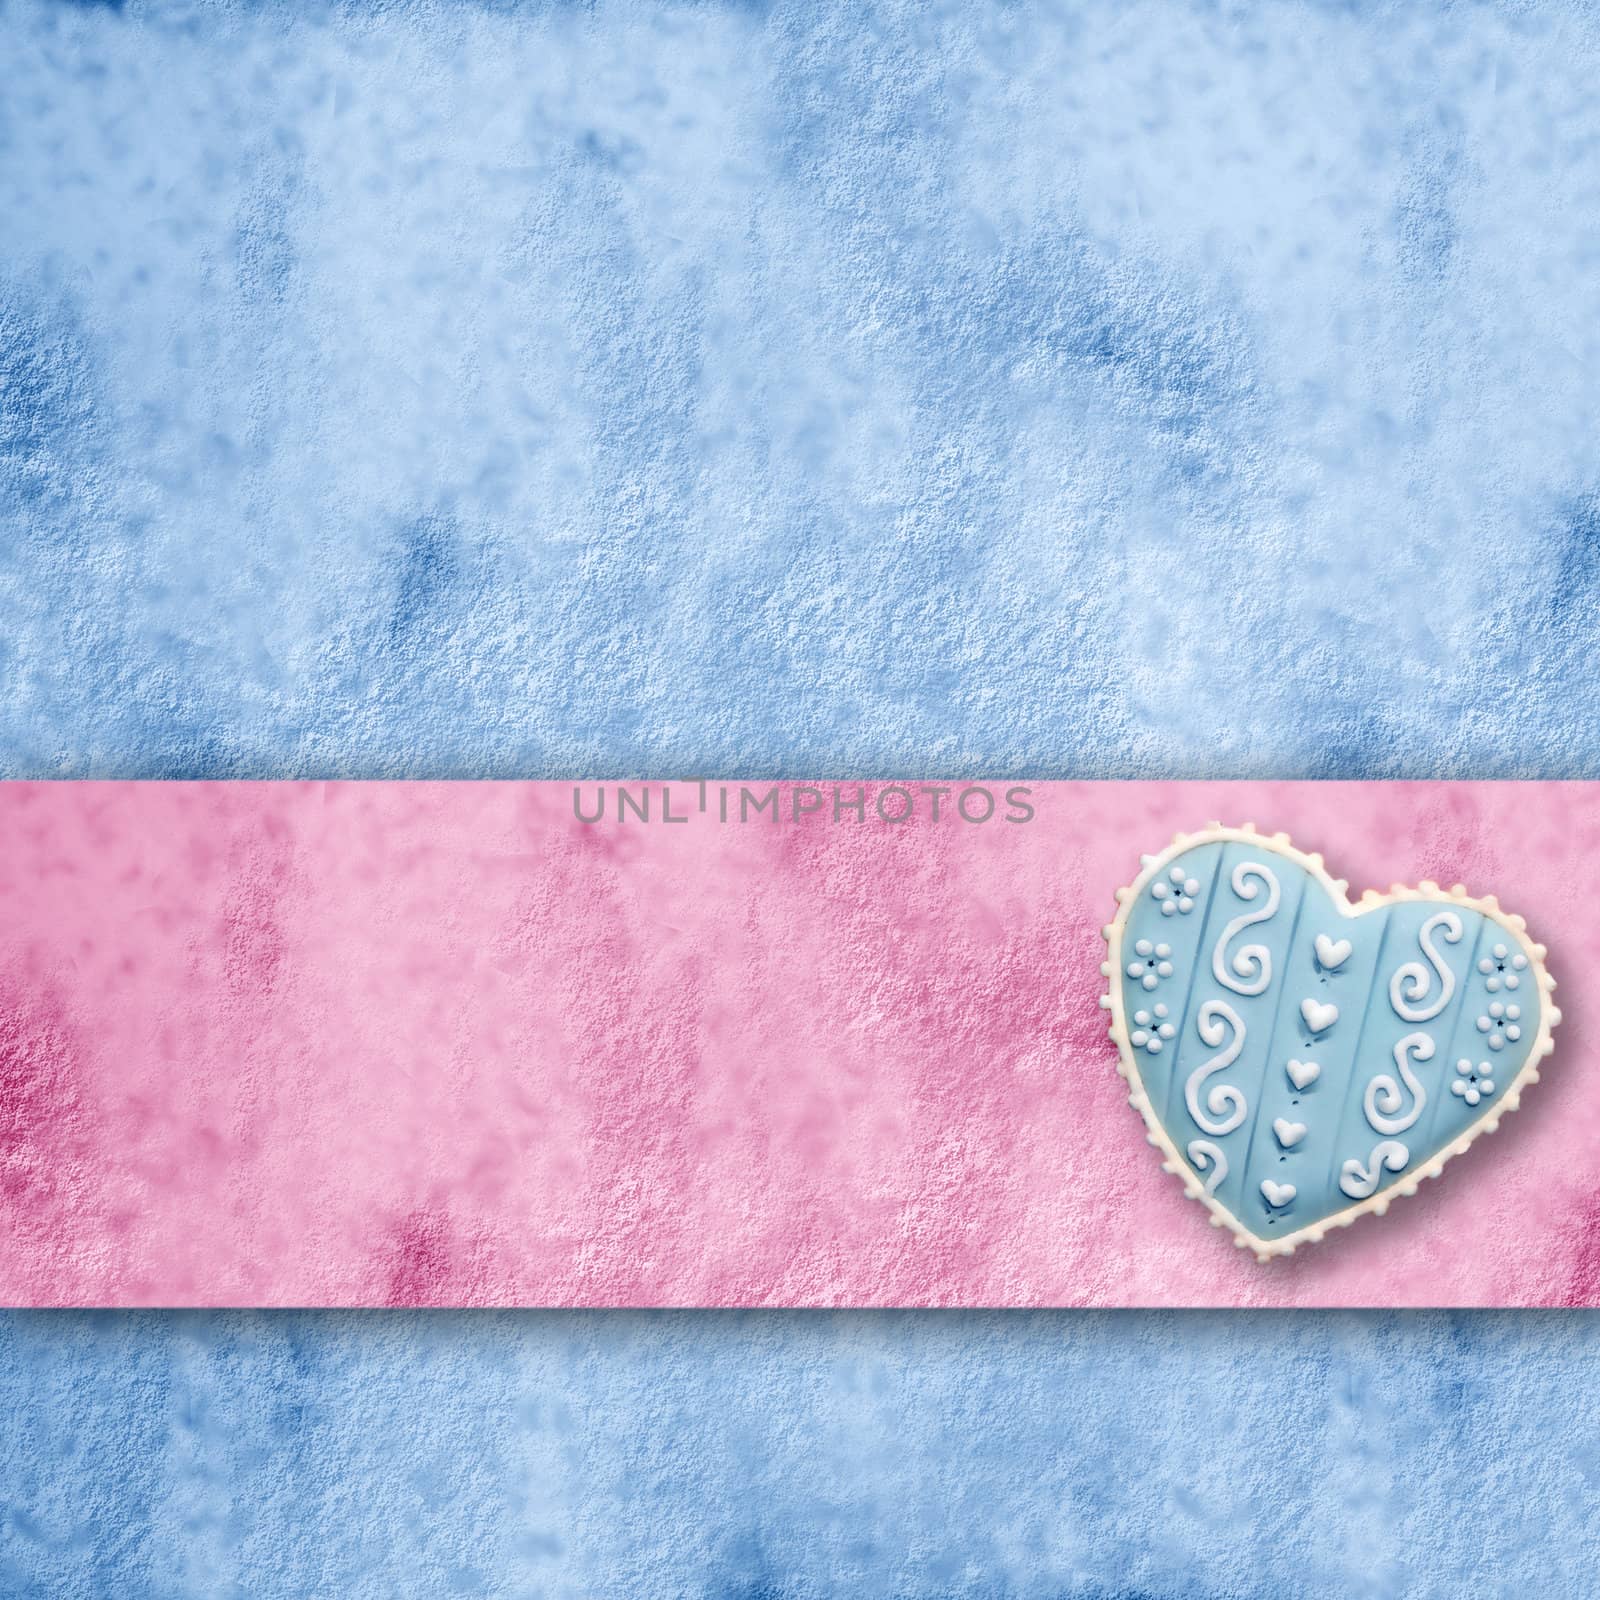 Valentin background with heart and copy space by Carche